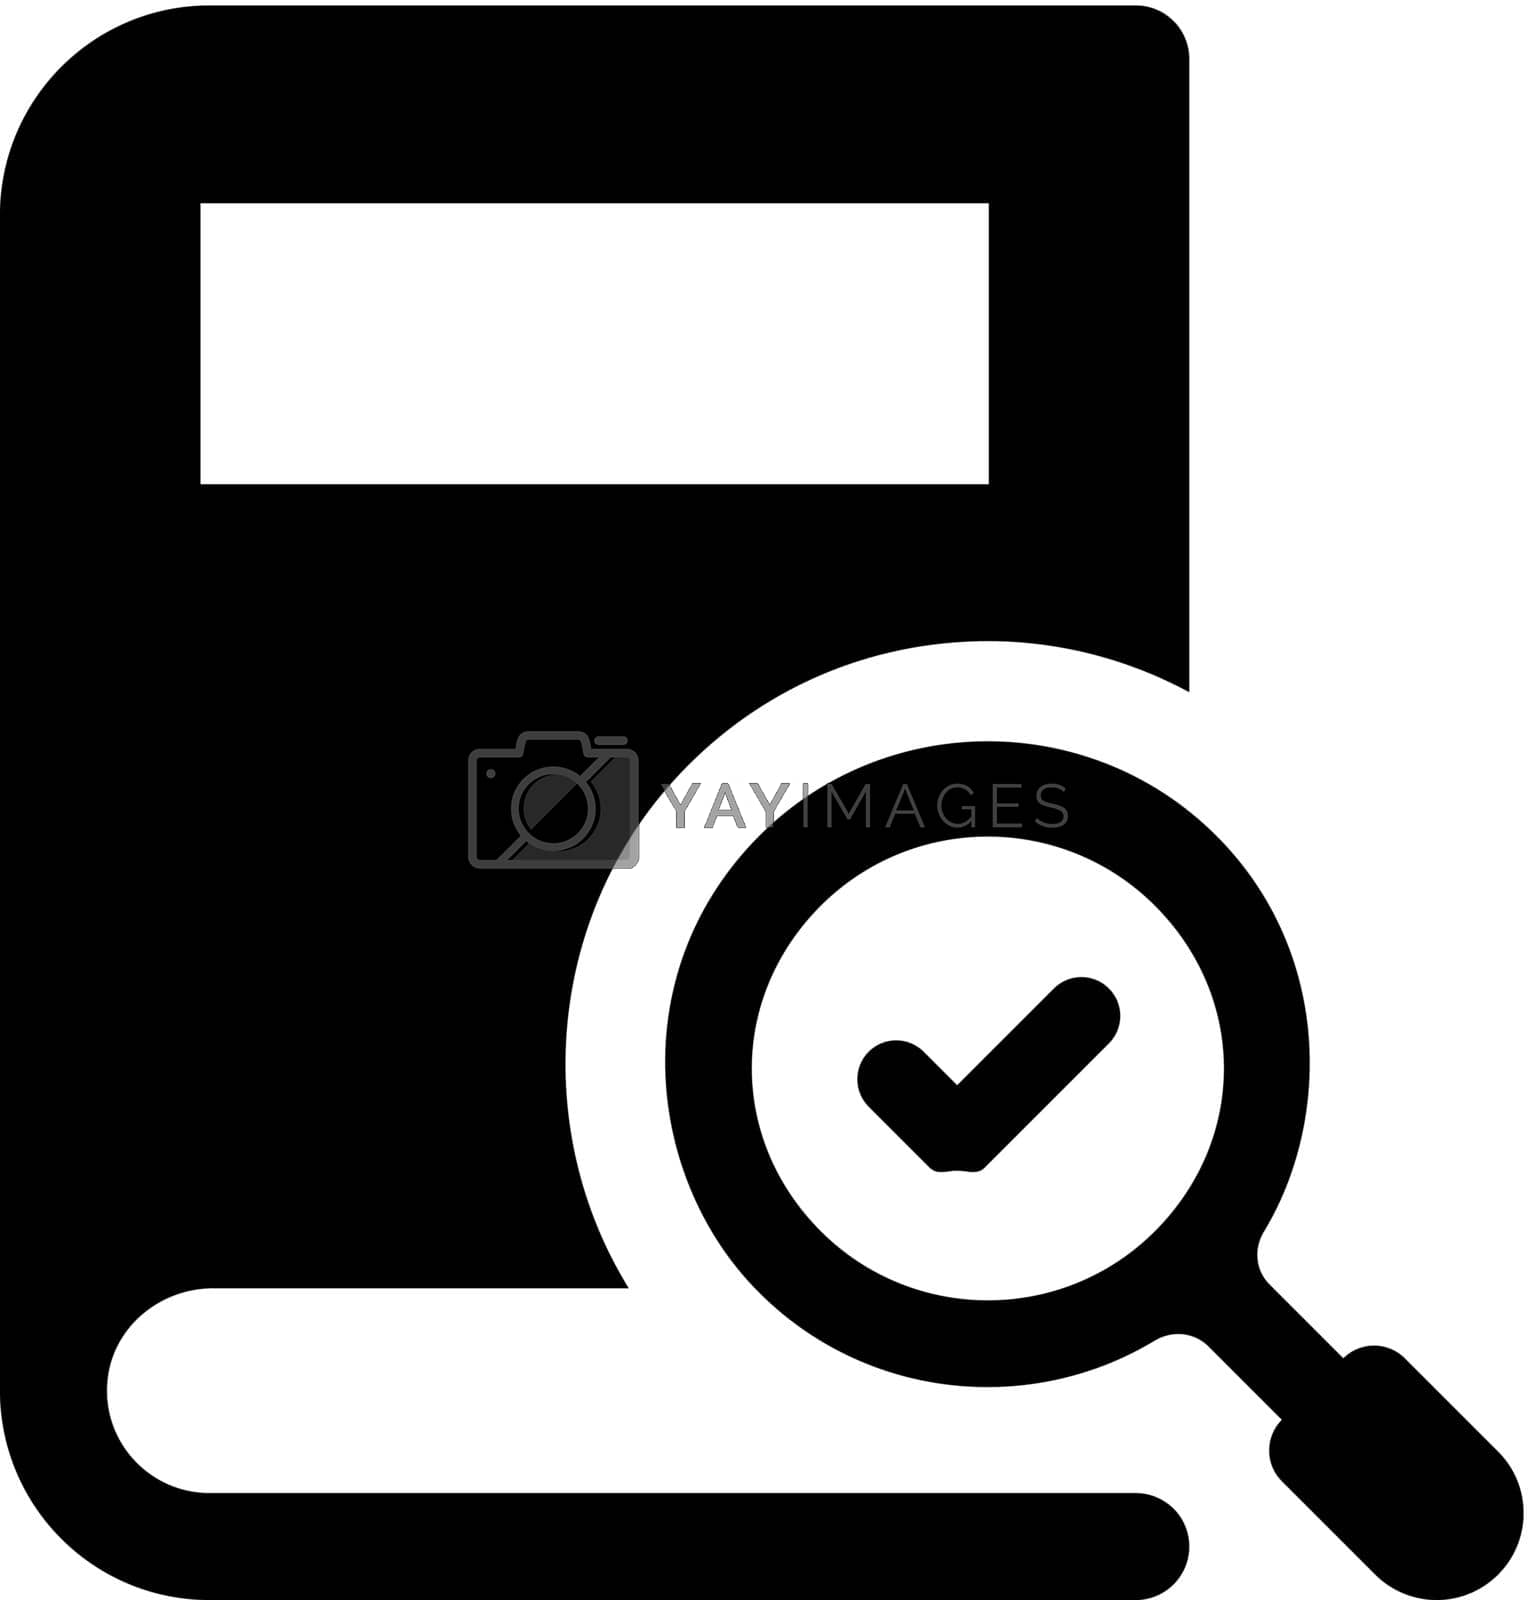 Royalty free image of Book search icon by delwar018